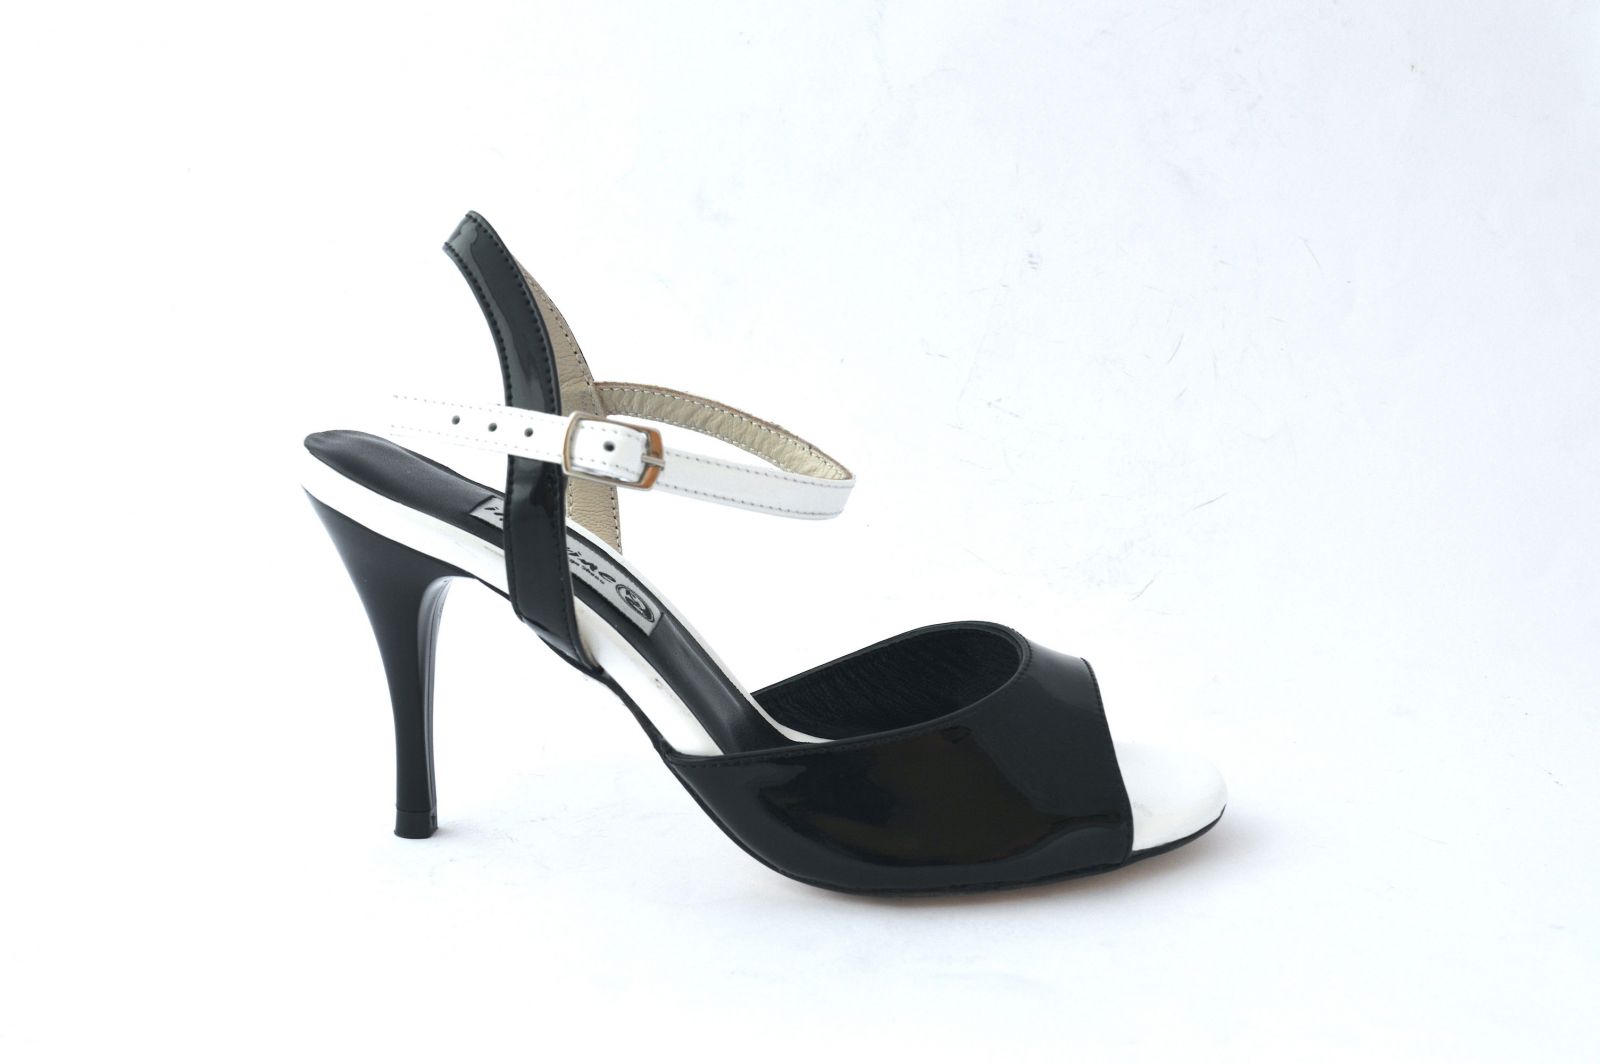 Women tango shoe, slingback, in black and white patent leather